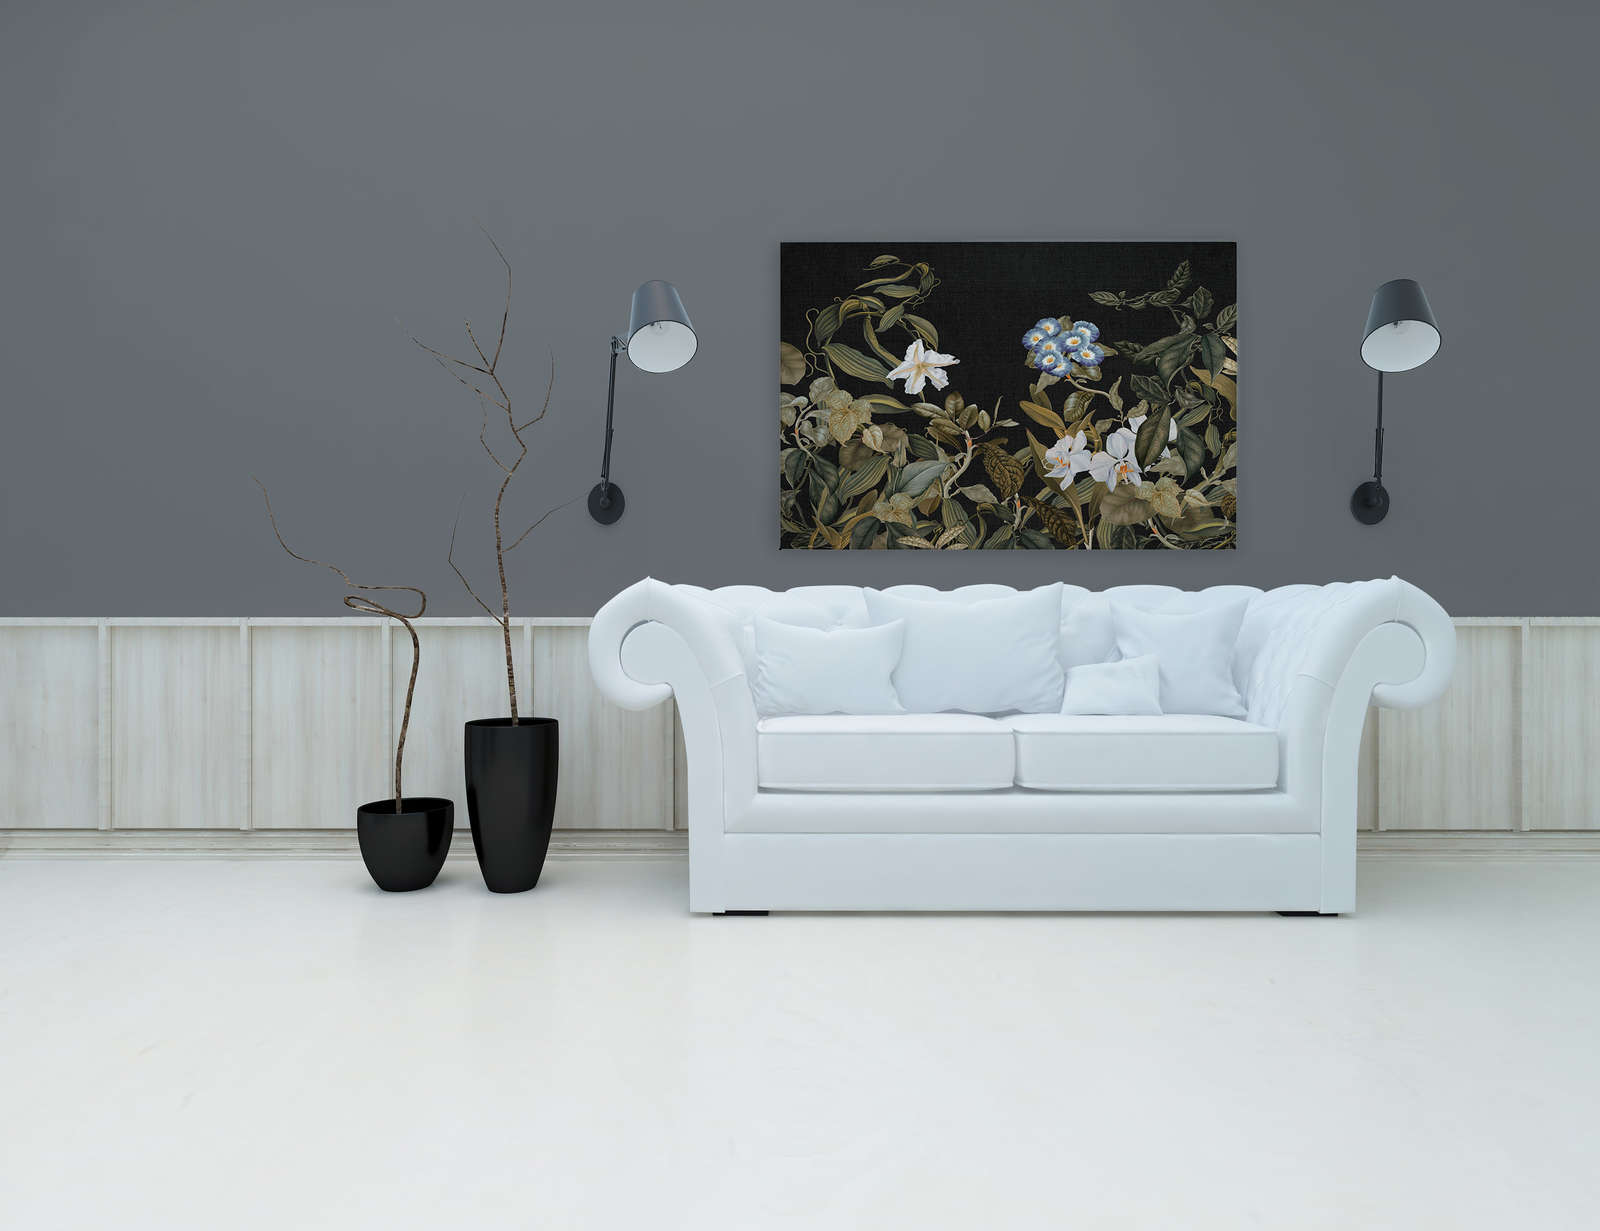             Botanical Canvas Painting with Orchids & Leaves Motif - 1.20 m x 0.80 m
        